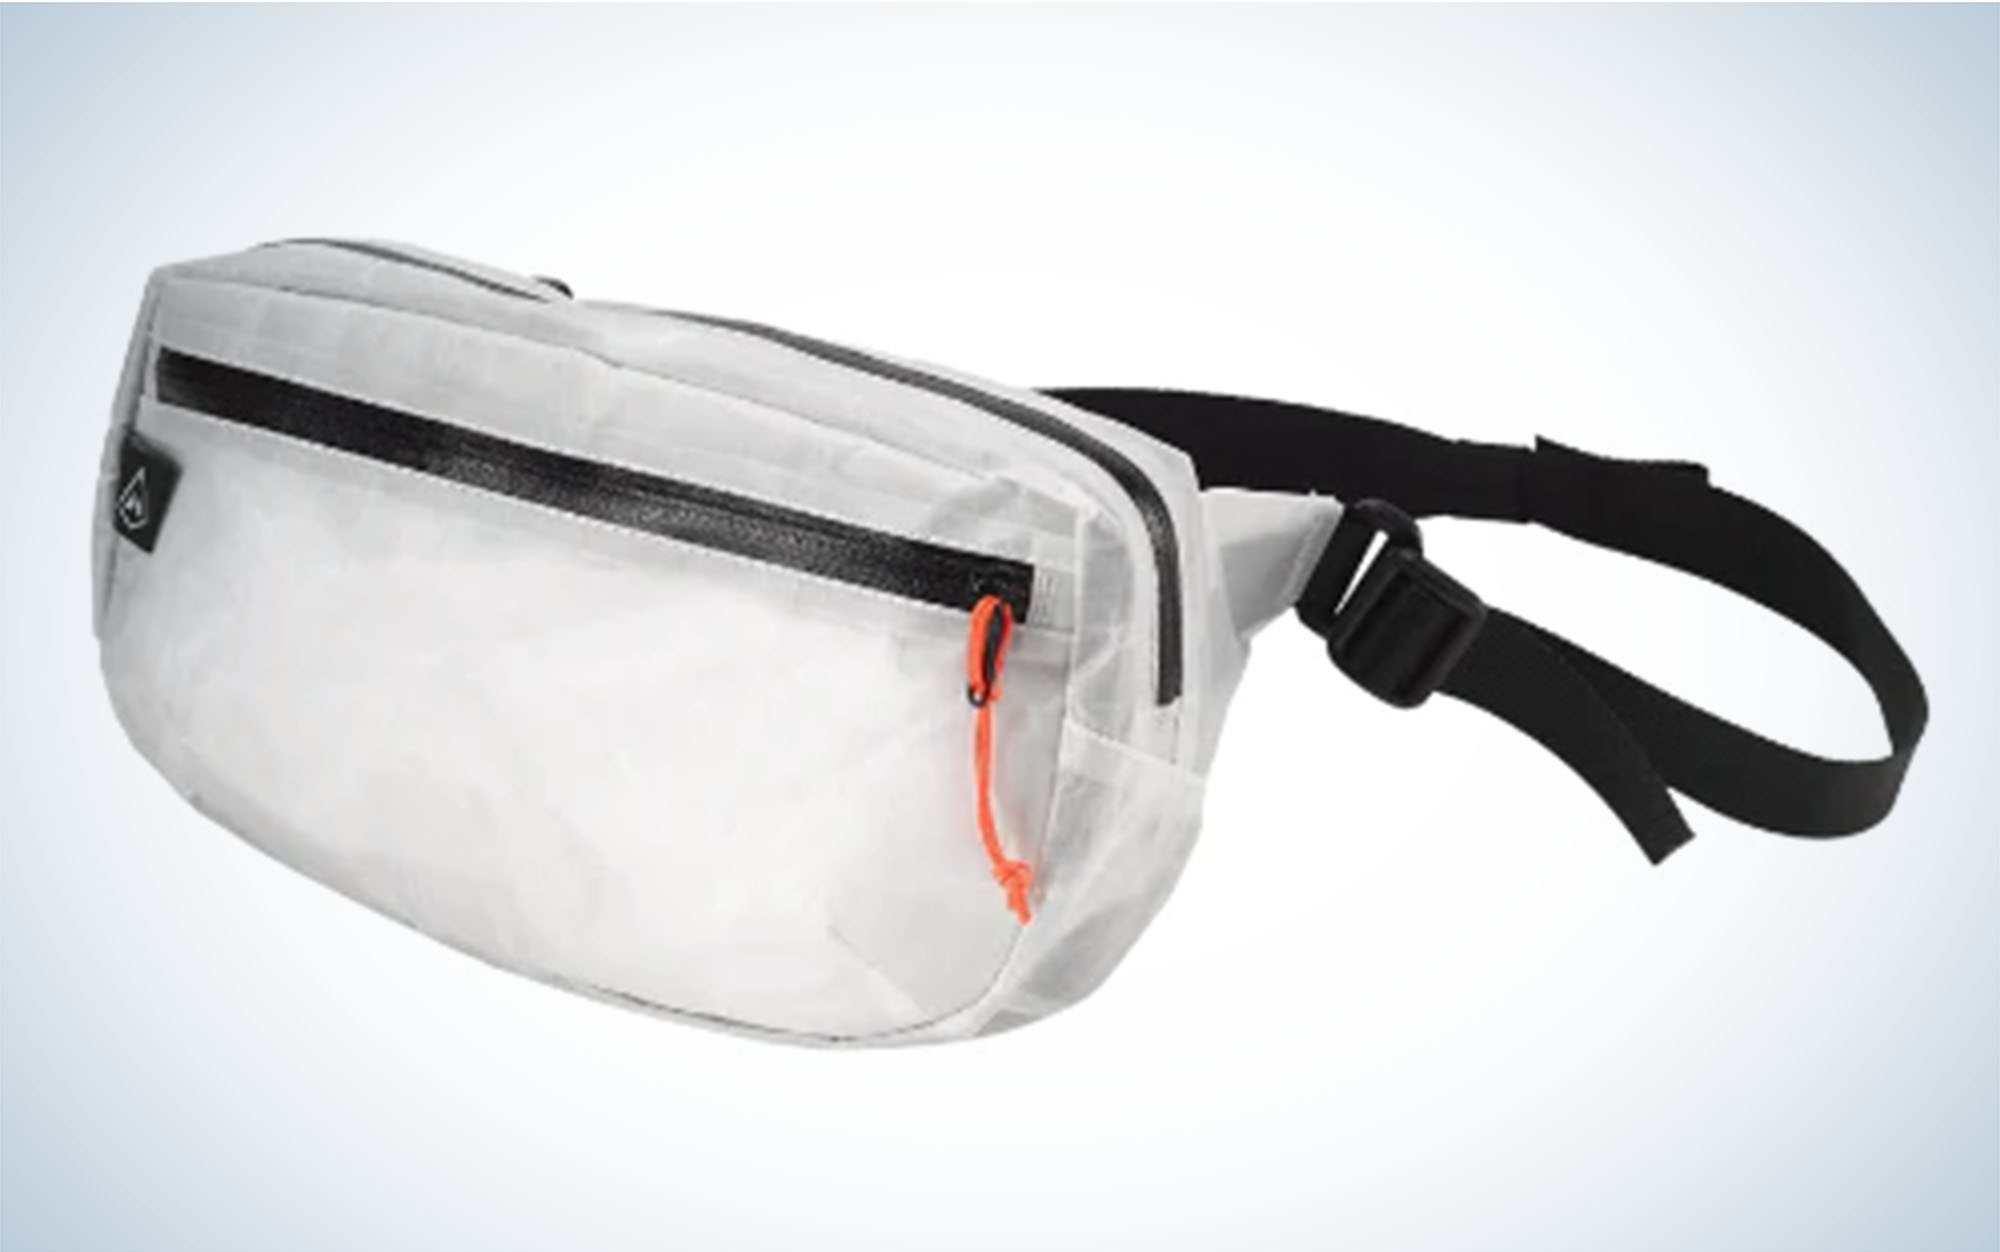 The Best Hiking Fanny Packs of 2023